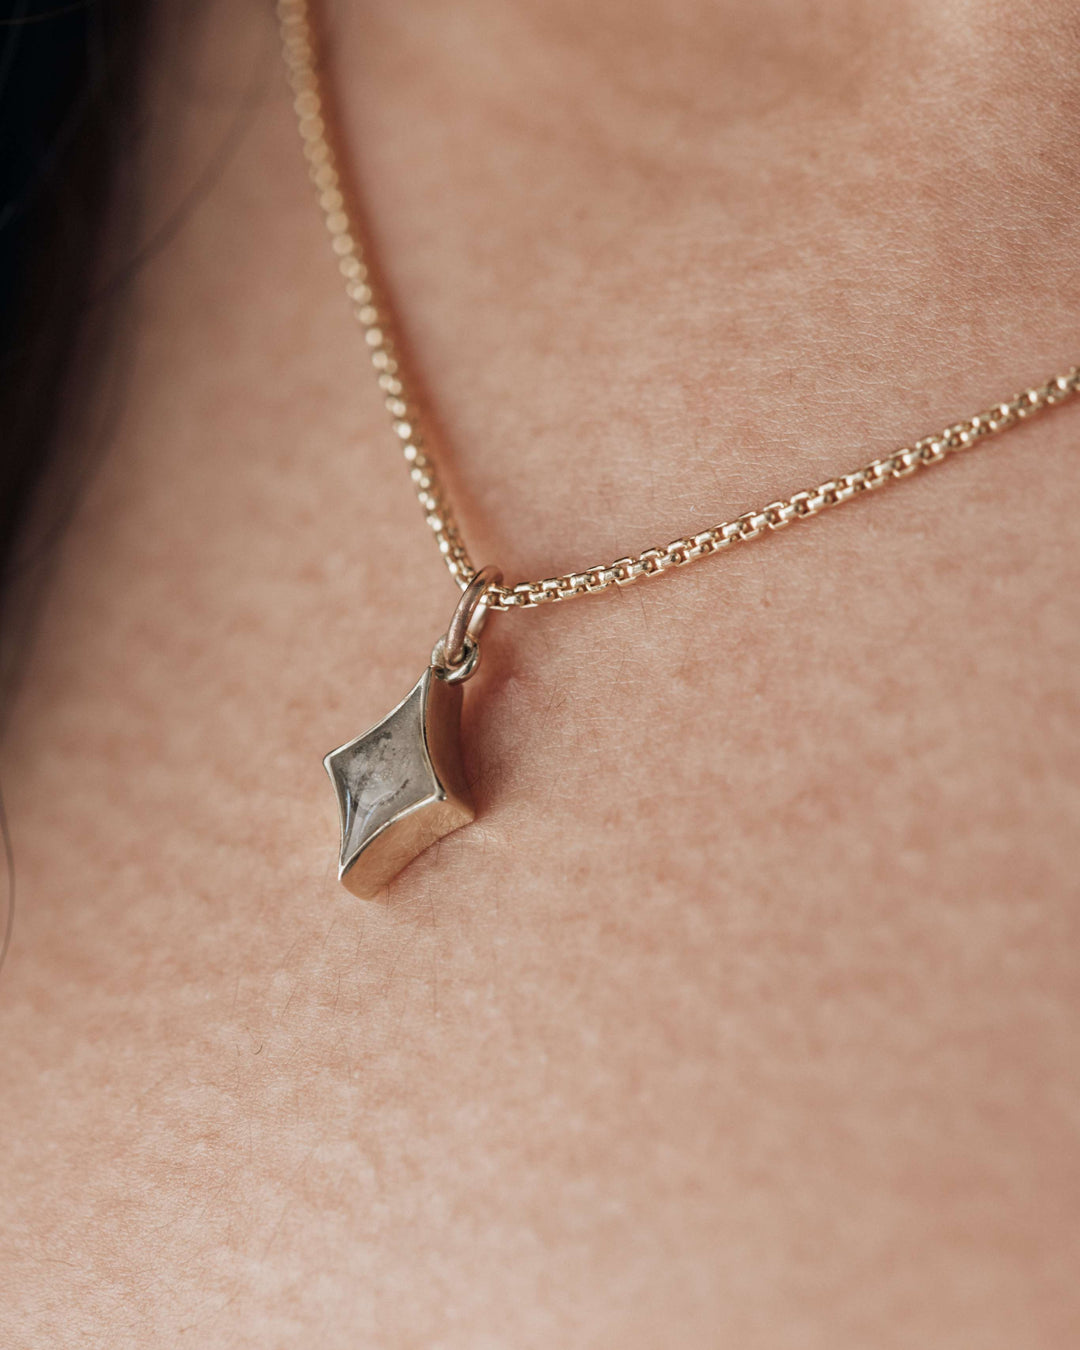 An angled and very close photo showing close by me jewelry's small diamond cremation necklace with ashes